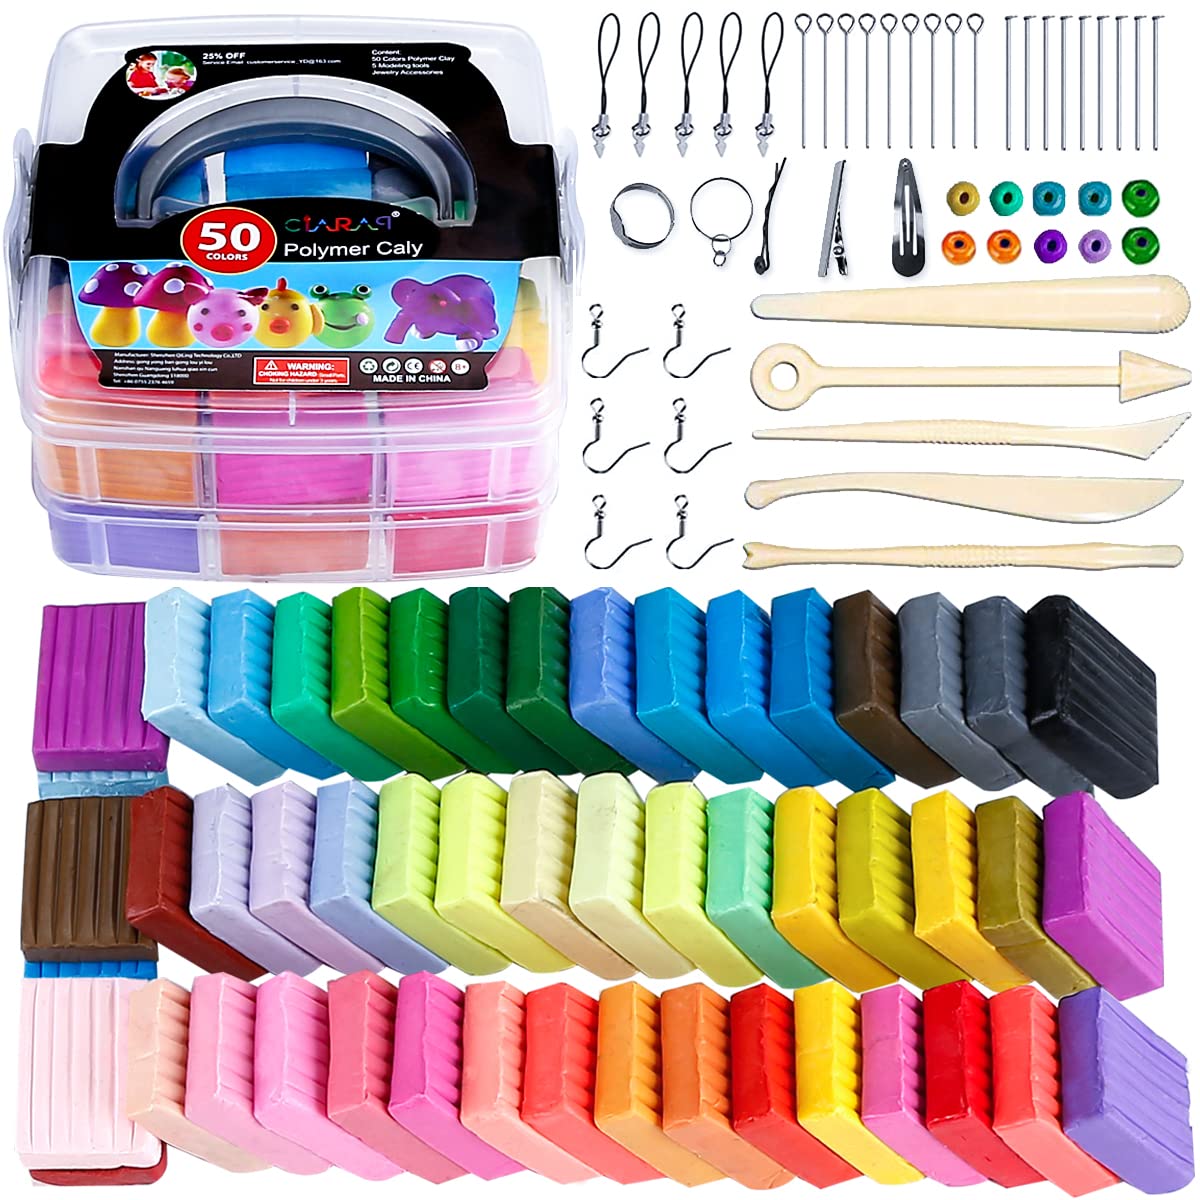 CiaraQ Polymer Clay-Oven Baked Modeling Clay with Sculpting Tools 50 Colors  3.41 lbs 50 Colors 25g / pcs